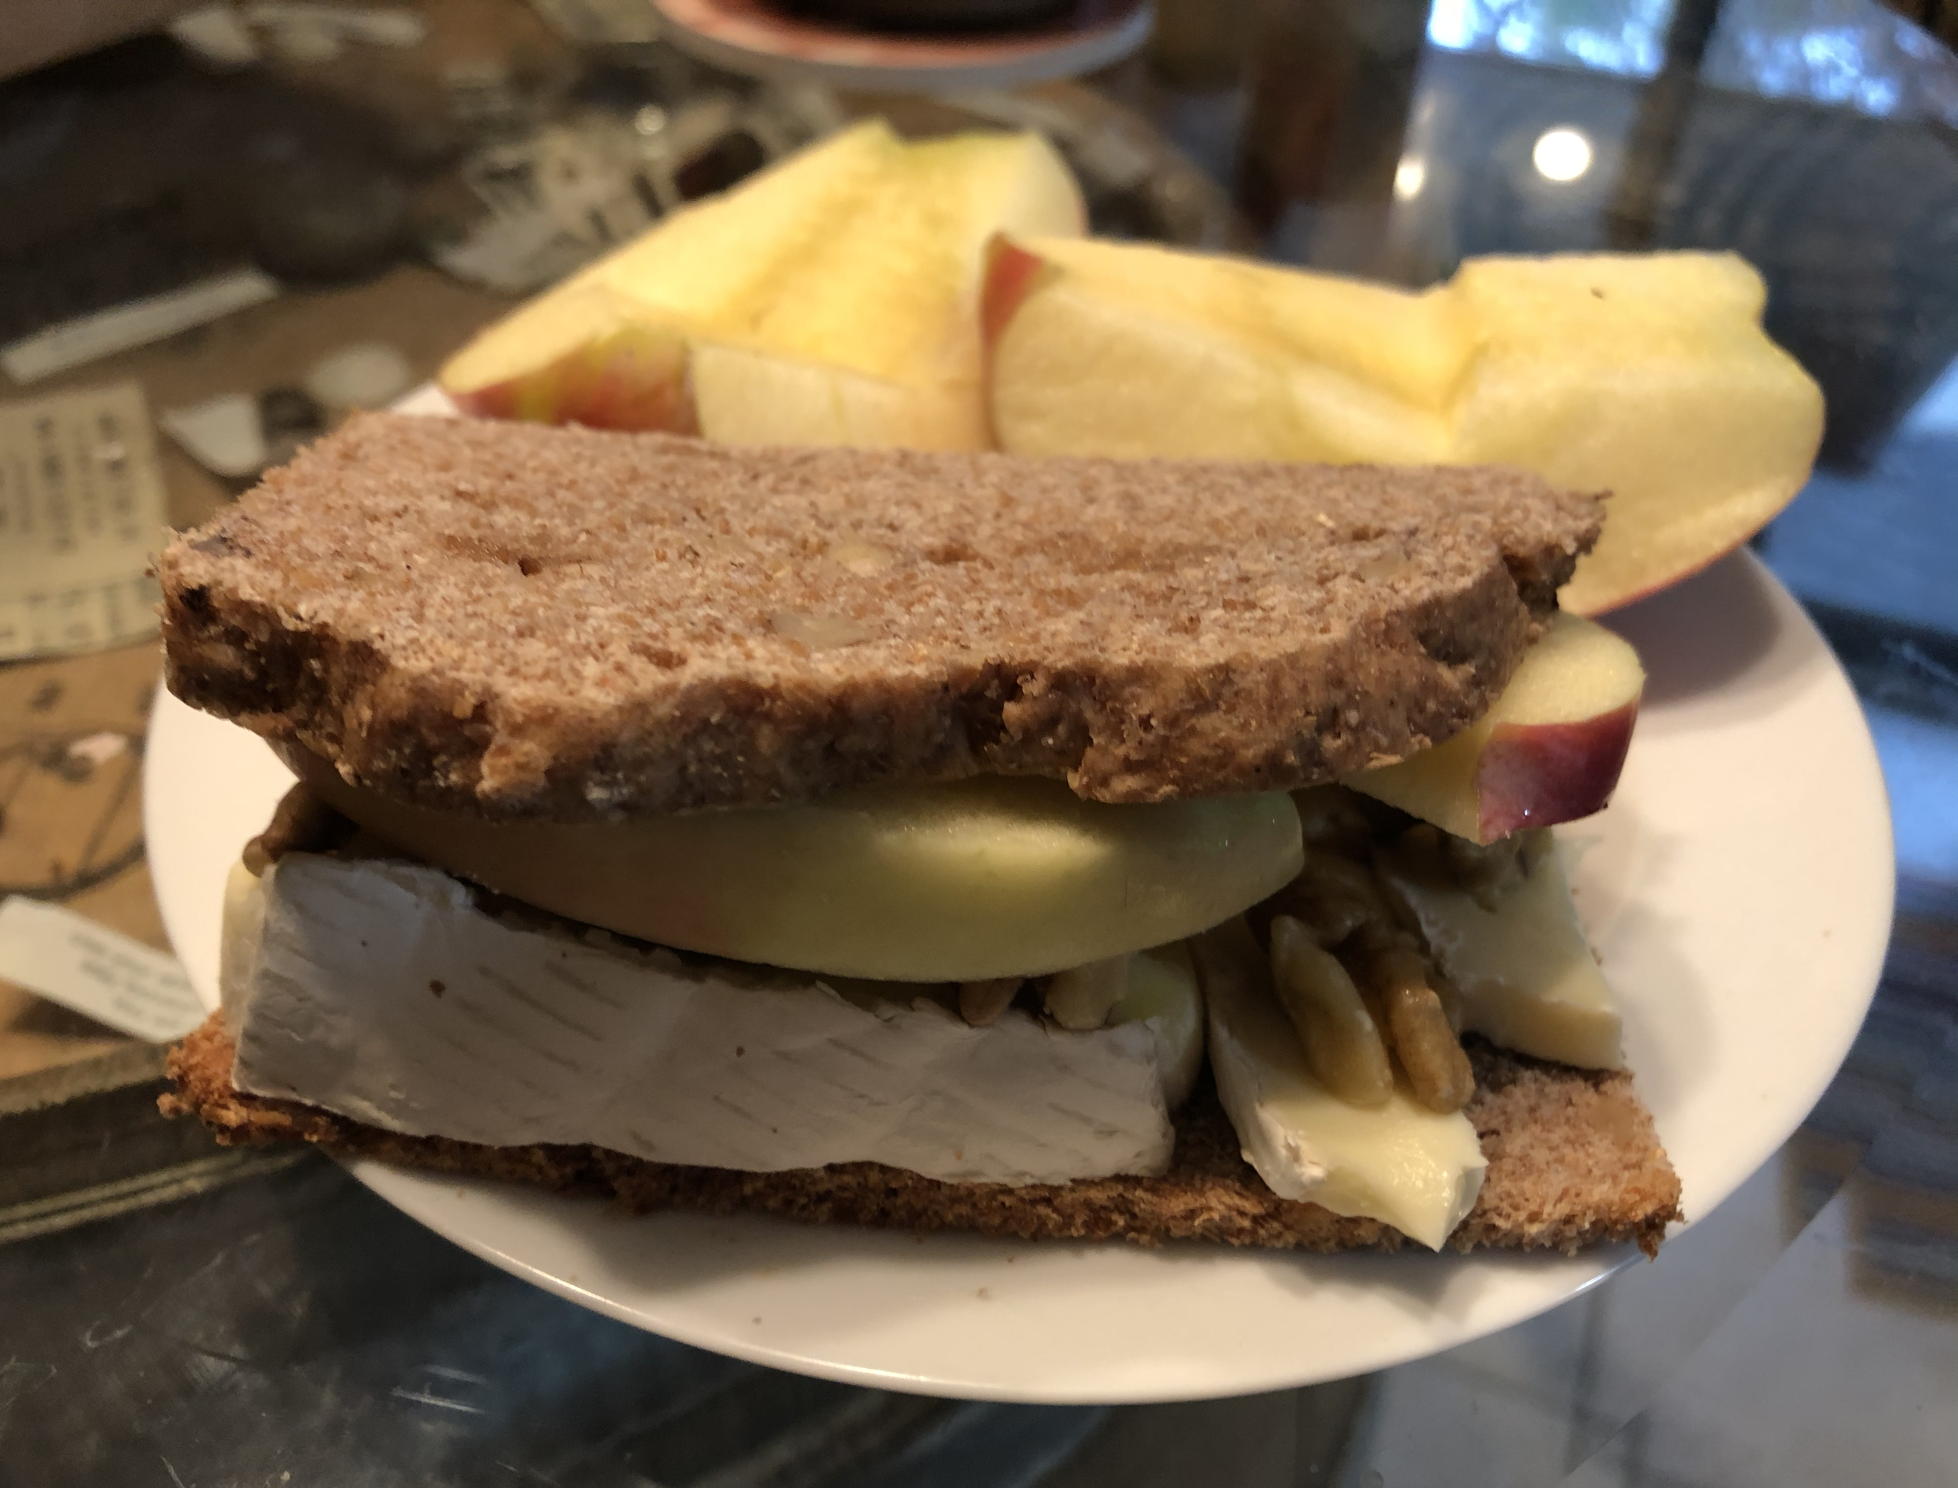 Apple and brie sandwich